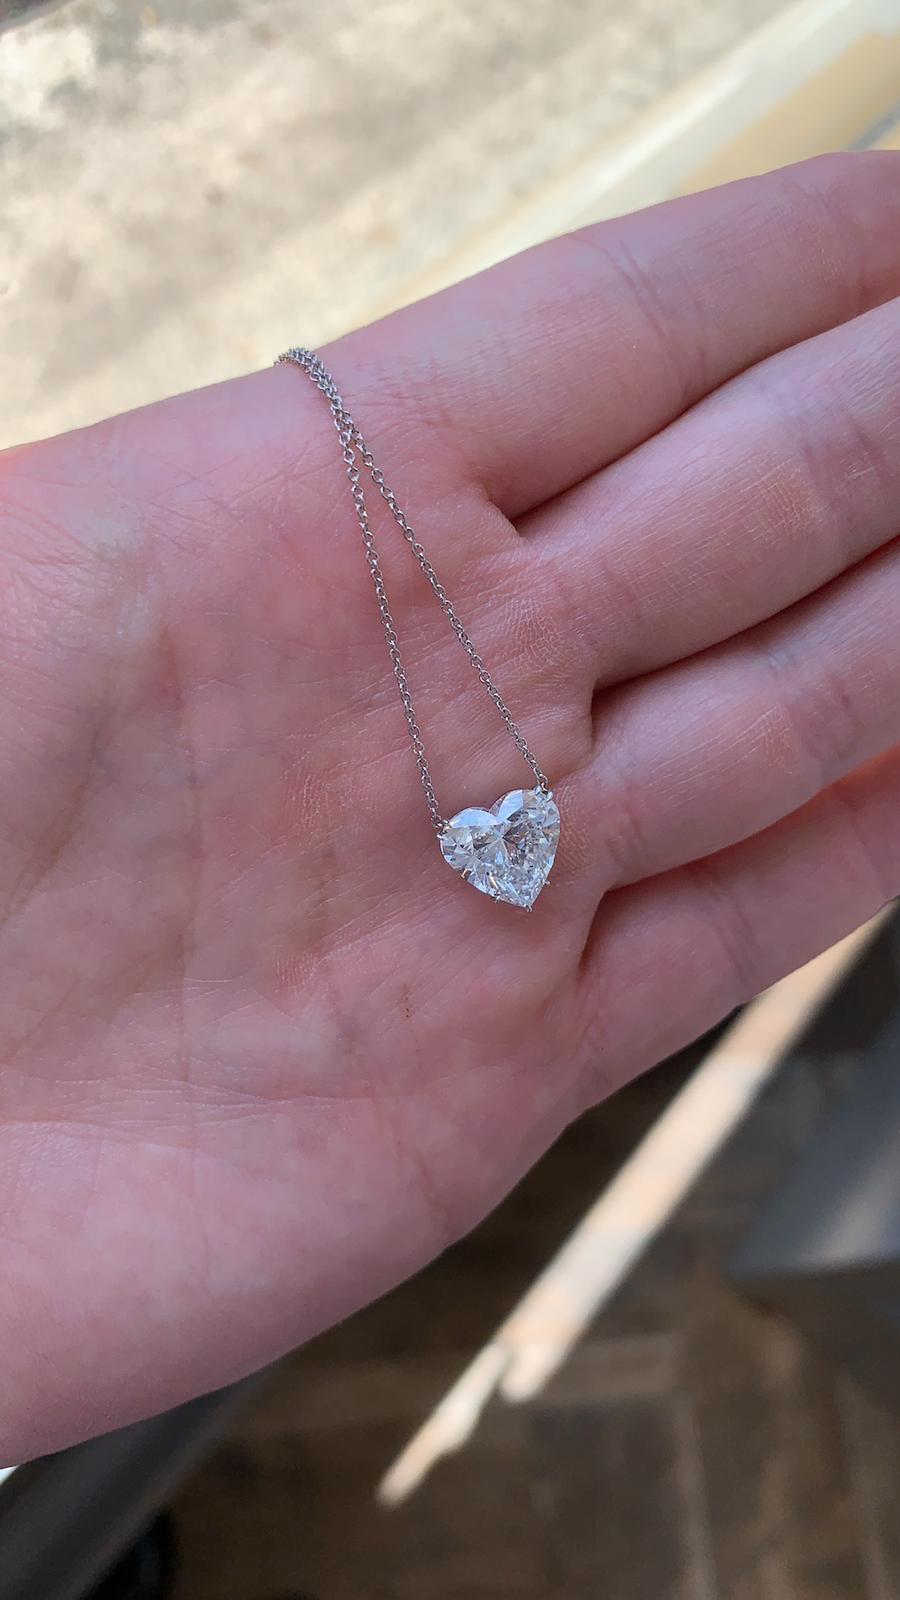 Exquisite diamond heart shape pendant necklace.
This dazzling heart shape diamond weighing 3.25 carat is graded by the GIA F in color VS1 clarity. This diamond Is special and unique for being perfectly cut with an exceptional flow of translucency